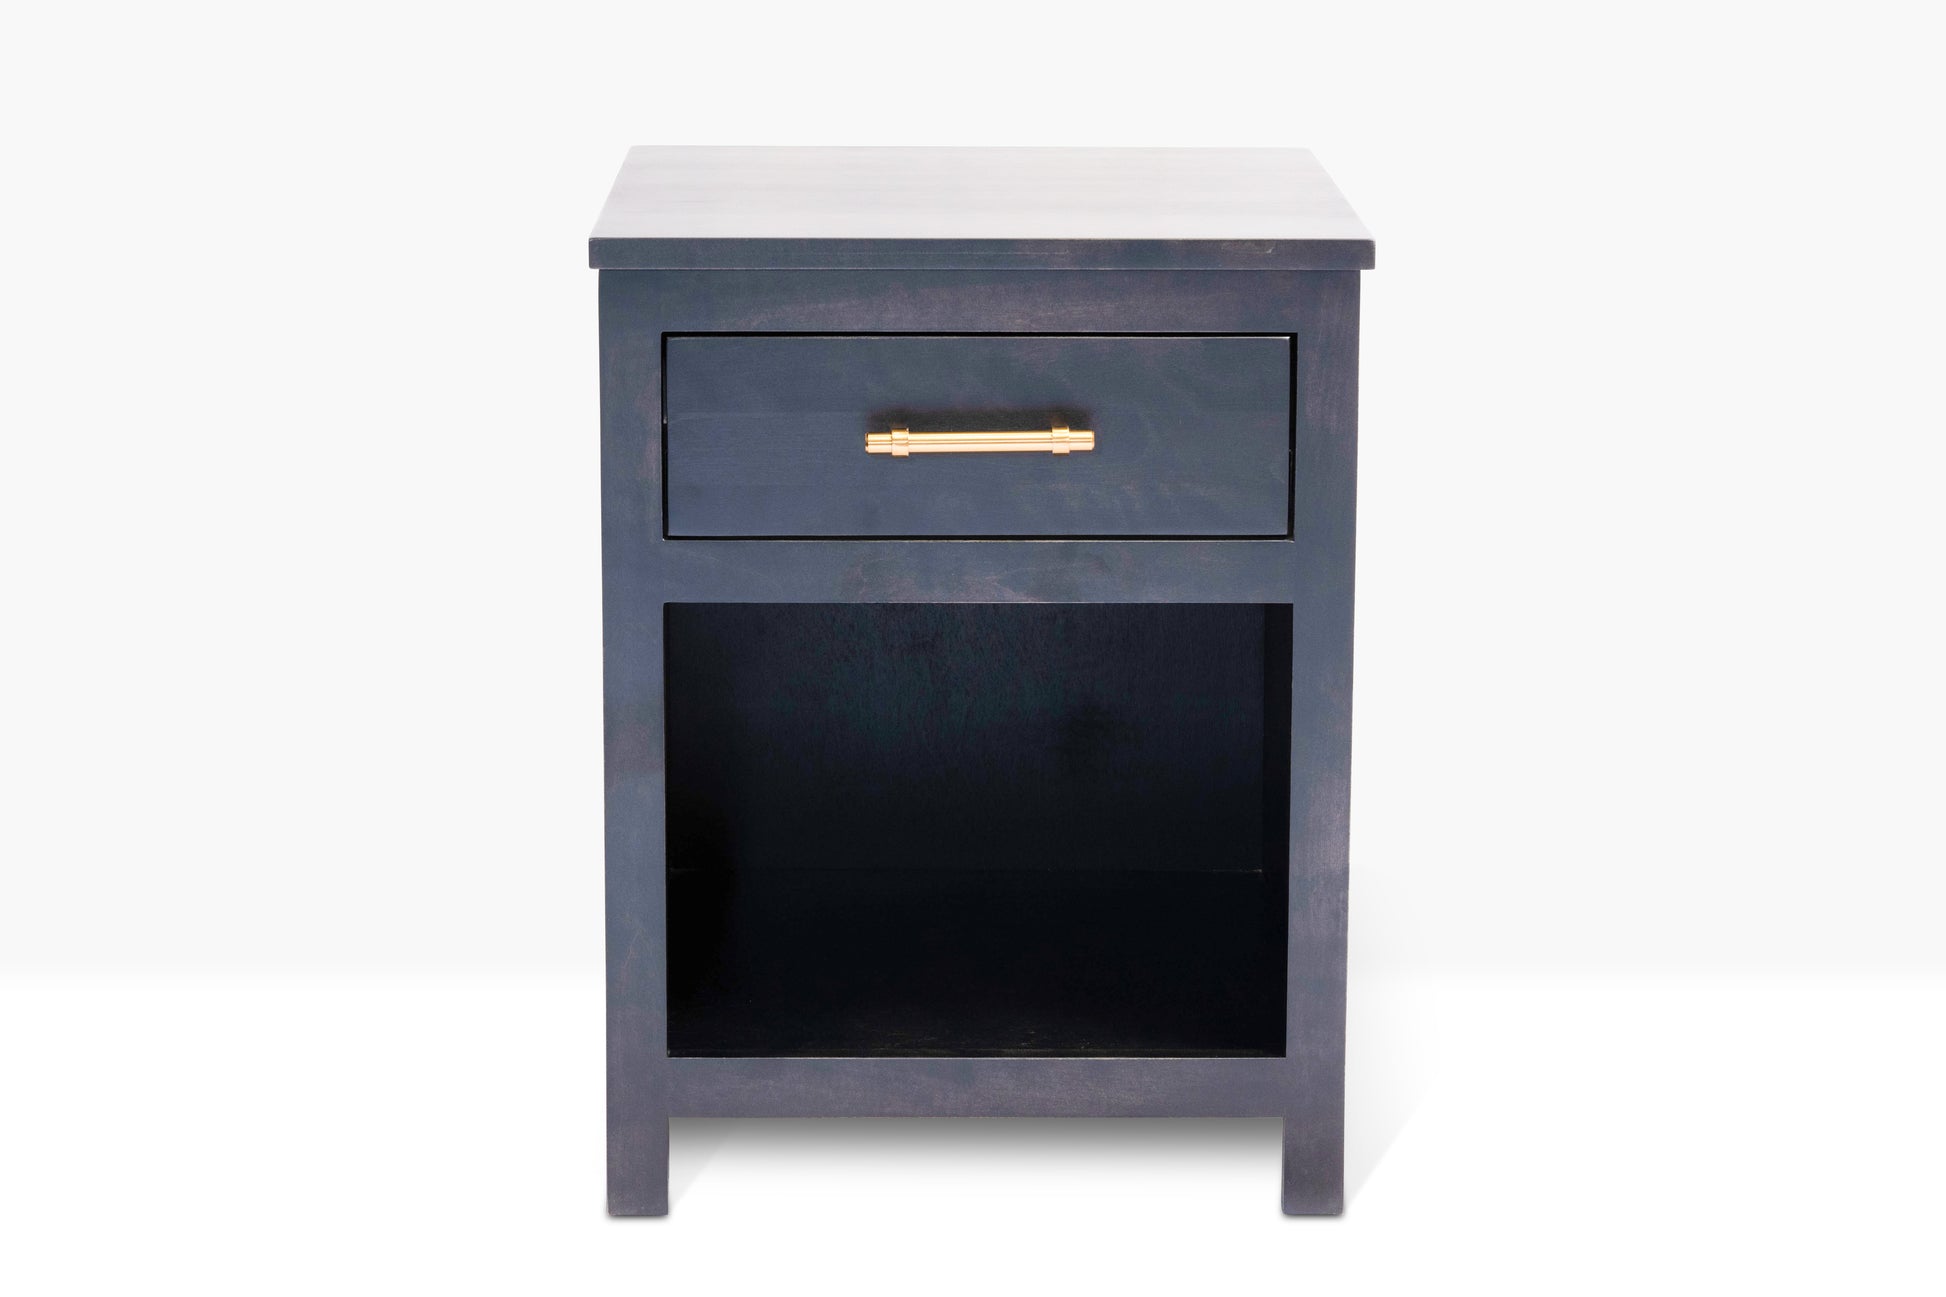 Acadia Tremont One Drawer Nightstand, shown from the front angle to show detail. Pictured in Nitefall finish.